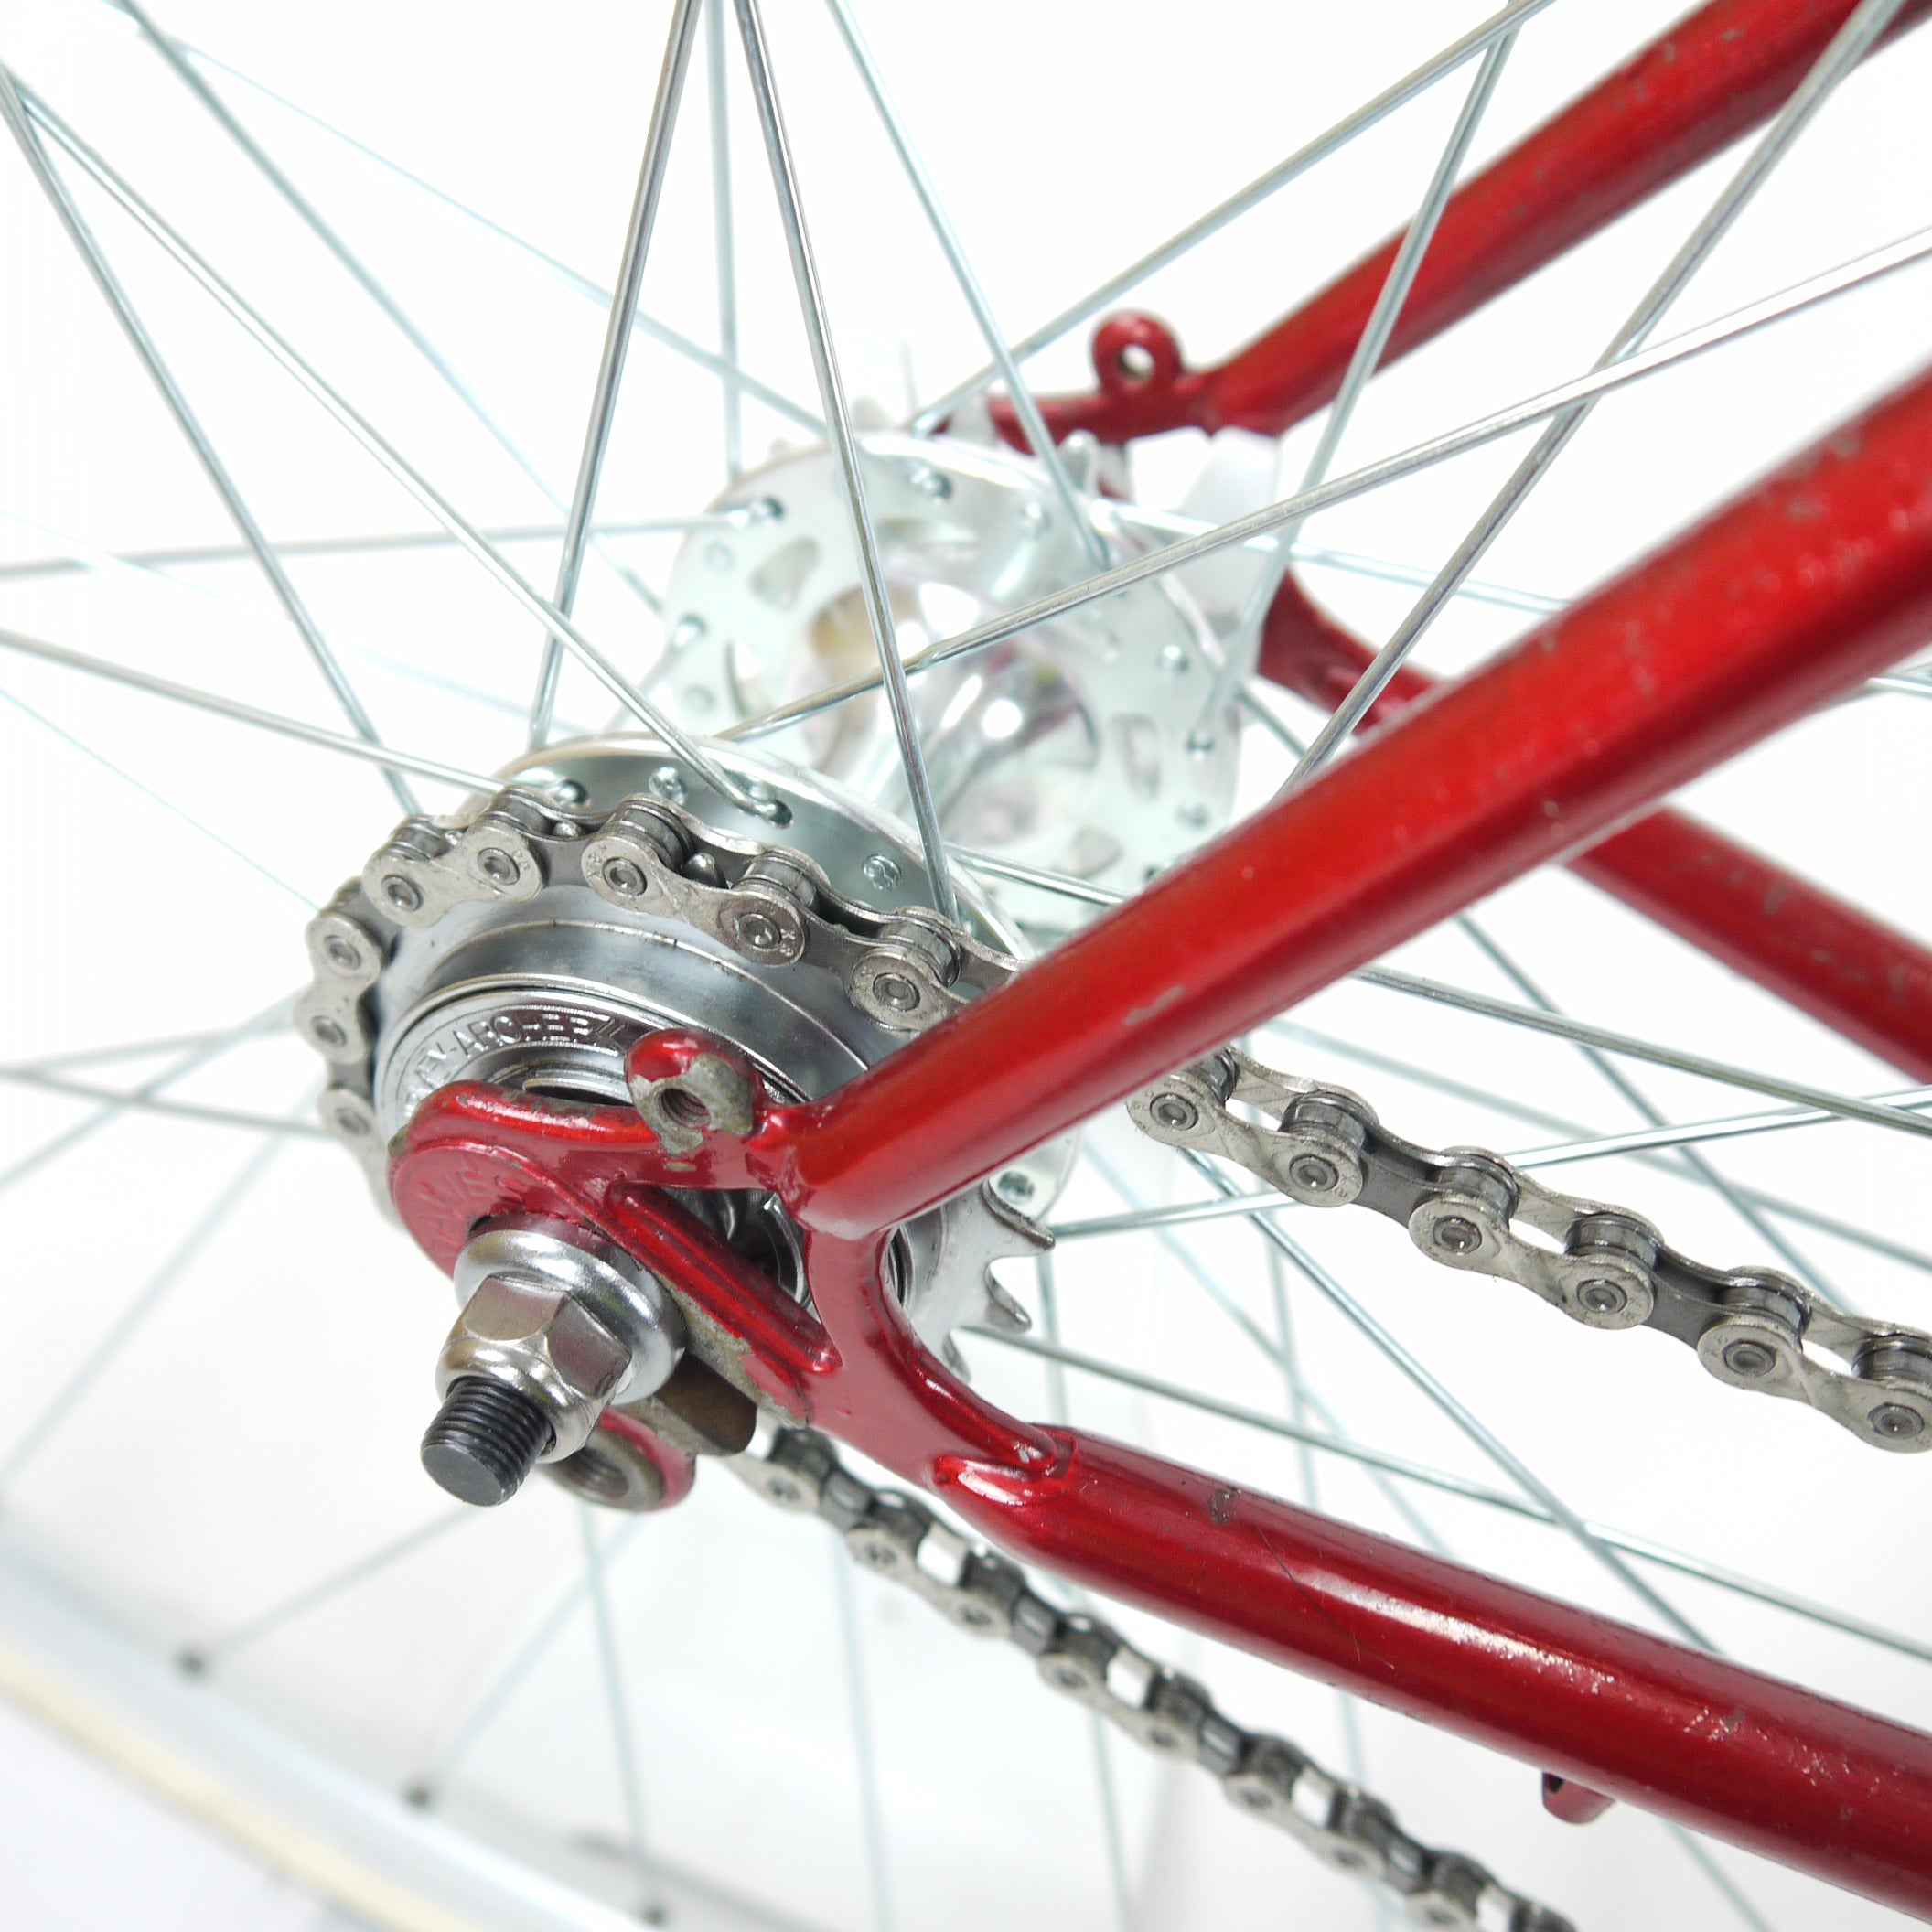 A red Dawes Mirage road bike's drop outs